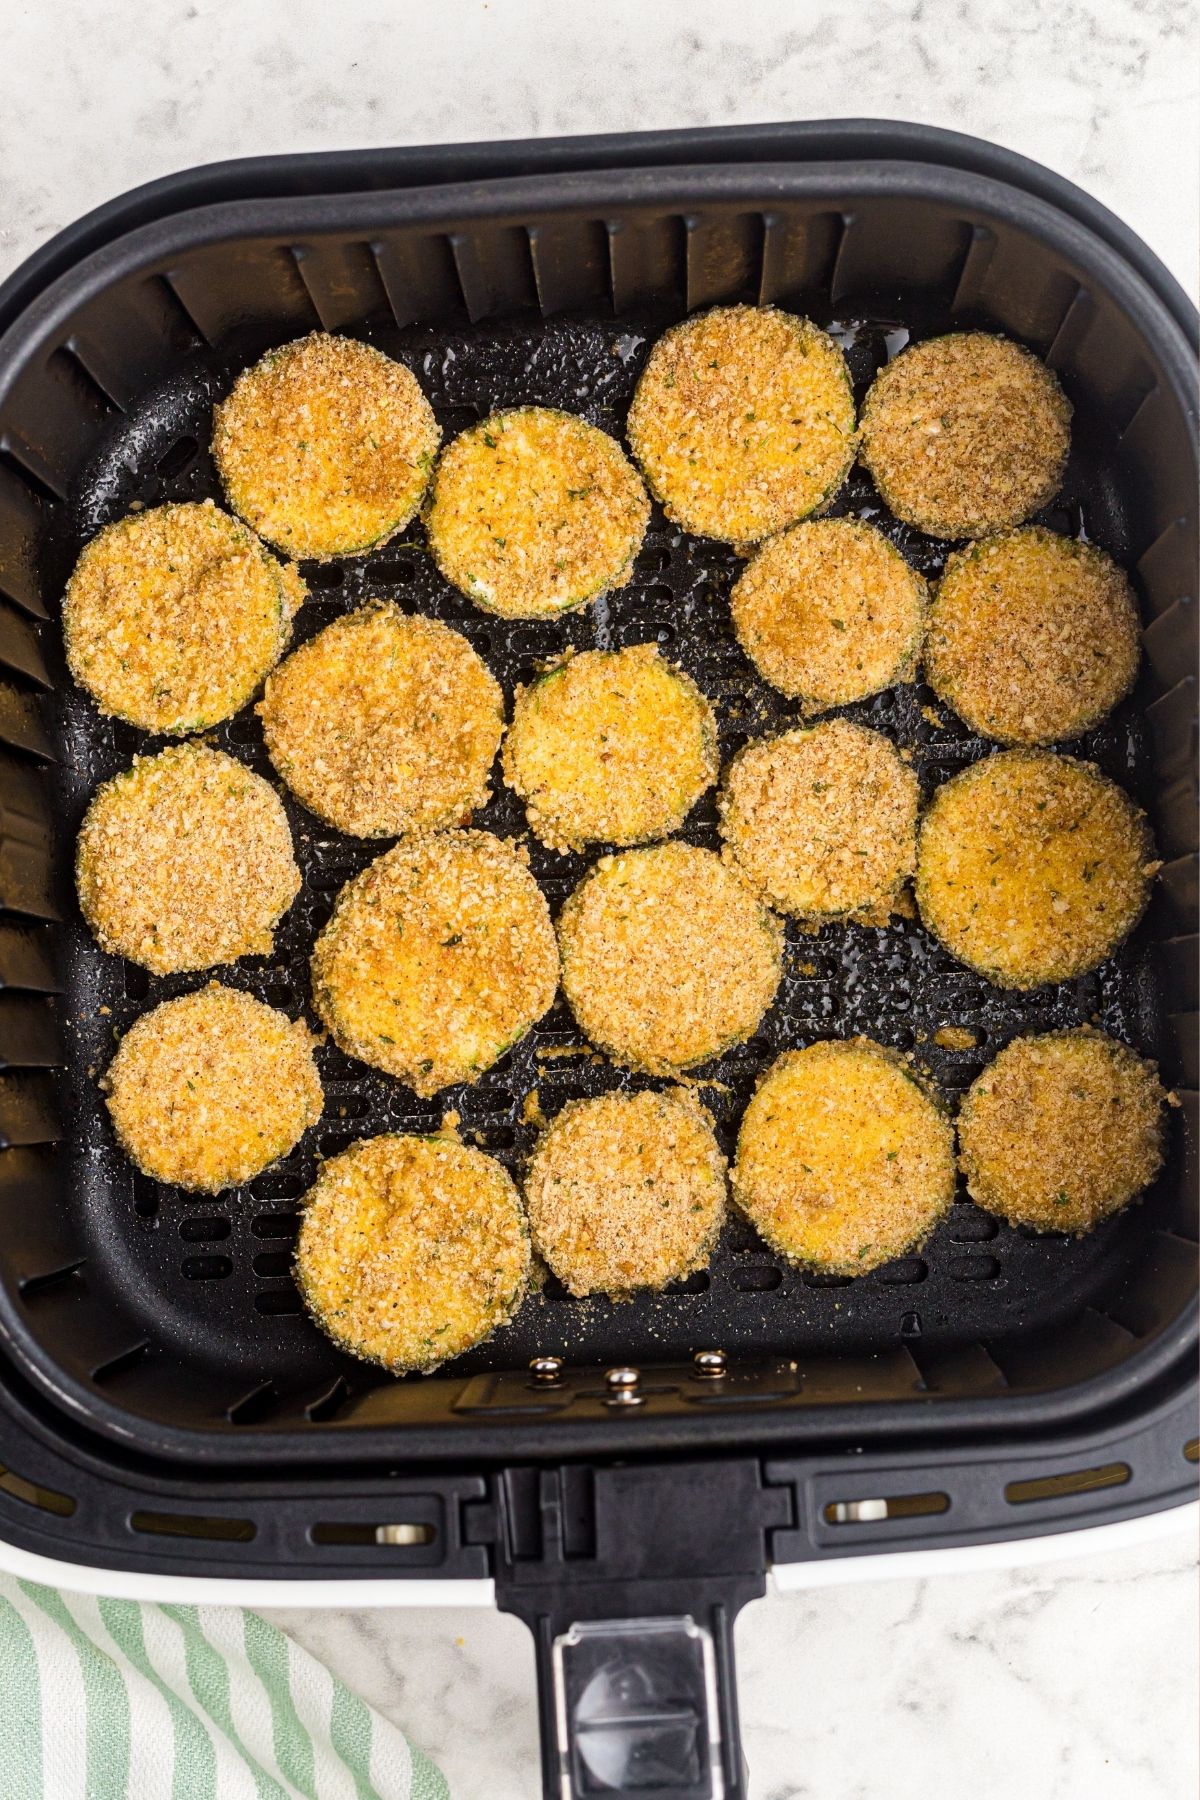 coated zucchini chips before cooking in air fryer